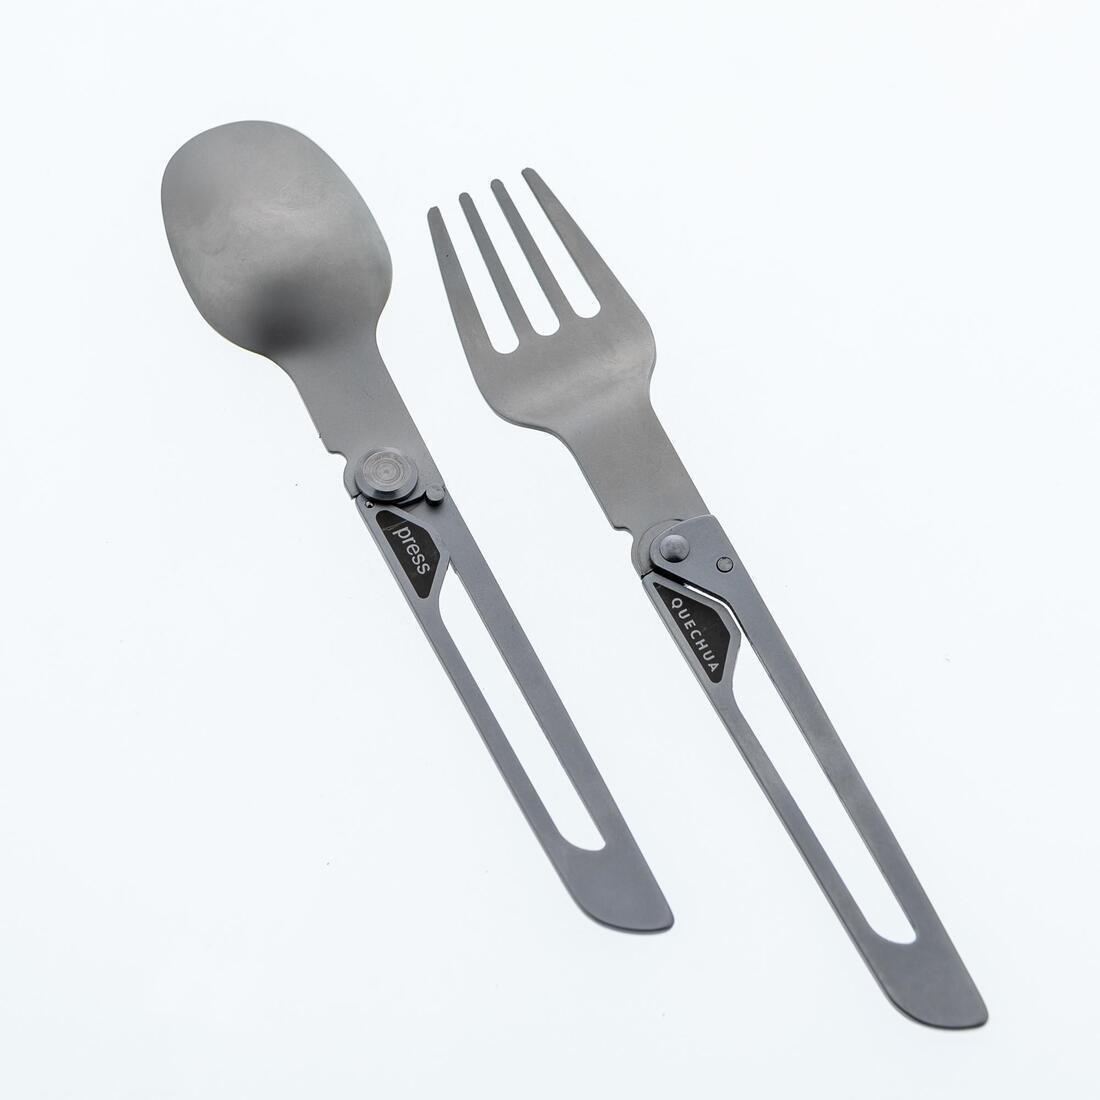 QUECHUA - Foldable Stainless Steel Camping Fork and Spoon, Grey